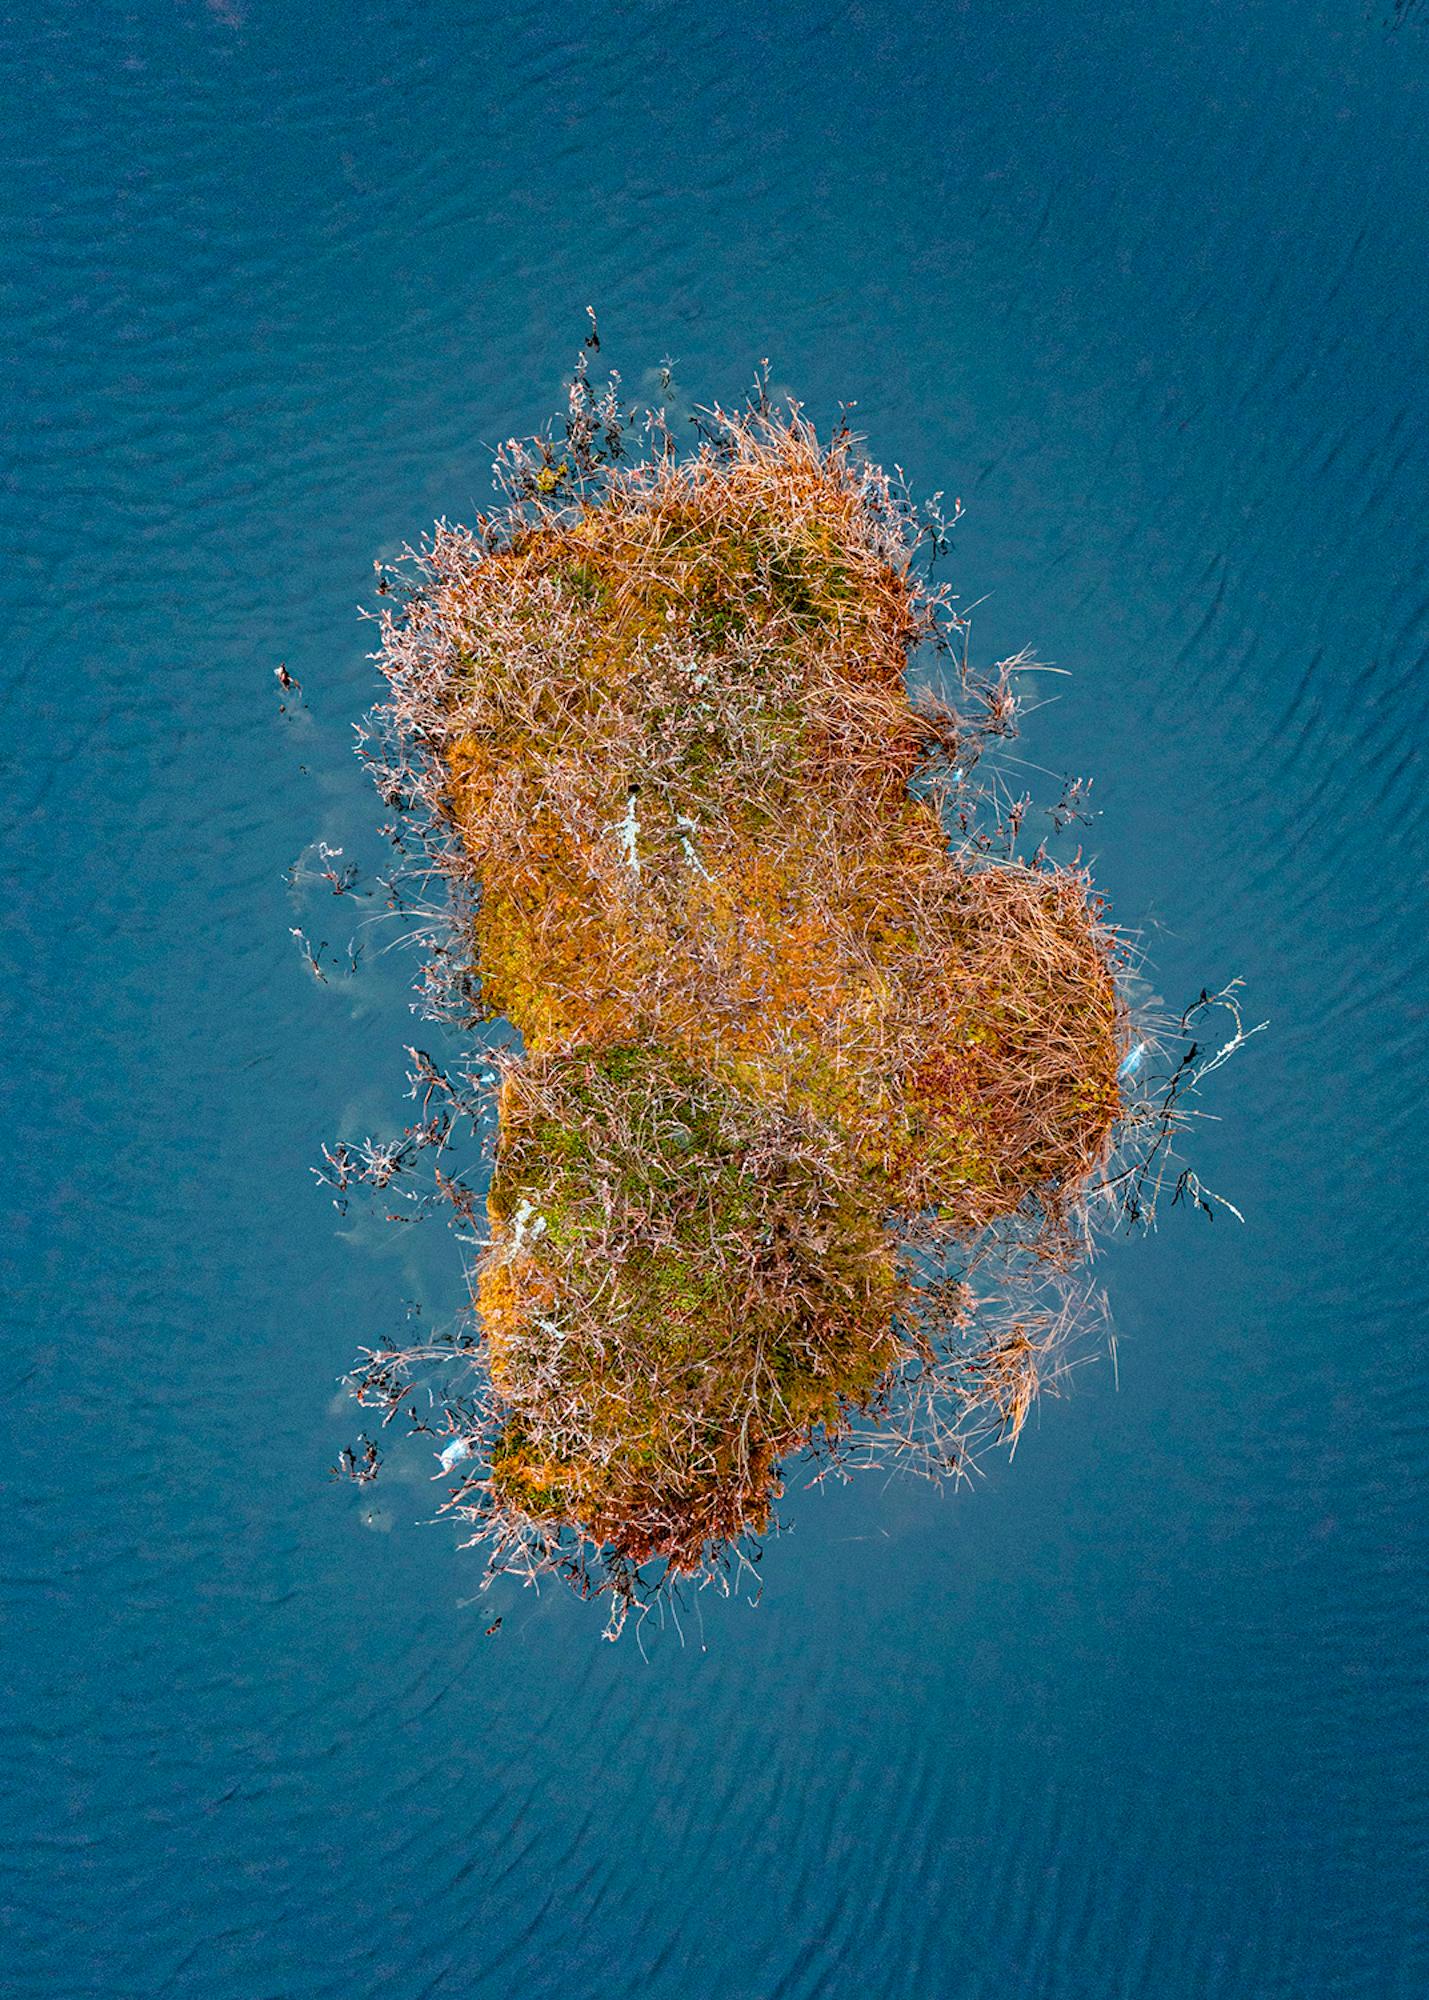 The Bog Islands 001 is a limited-edition photograph by German contemporary artist Bernhard Lang. 
Available print sizes:
- 19.7 x 14.7 inches (50 × 37.5 cm): edition of 8
- 27.5 x 19.7 inches (70 × 50 cm): edition of 8
- 35.4 x 25.2 inches (90 ×